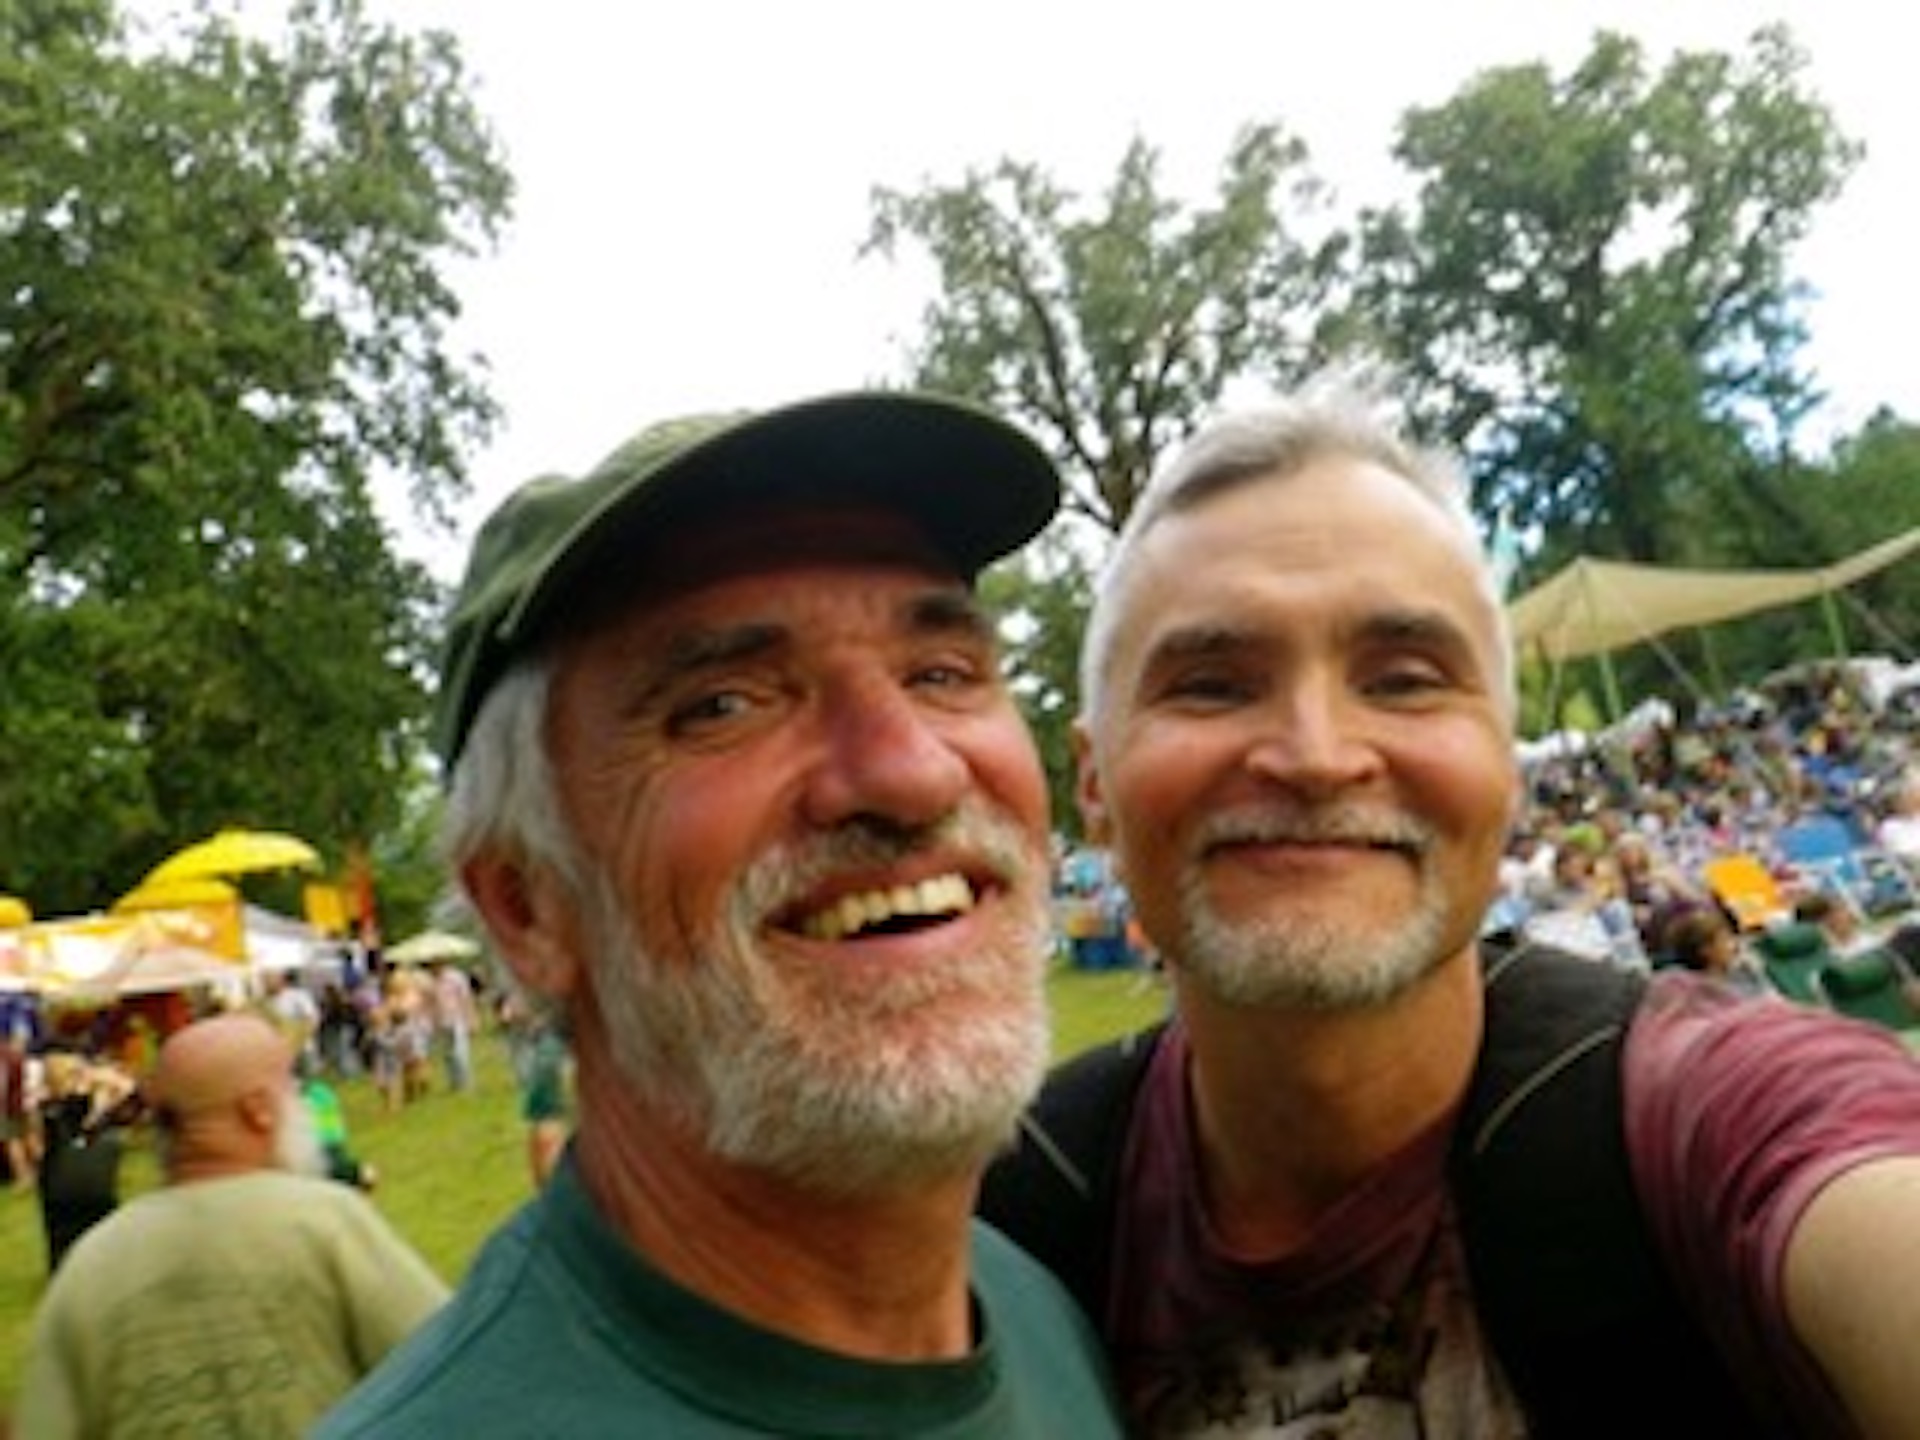 Ron Vanscoyk and his husband Scott Love at a music festival.